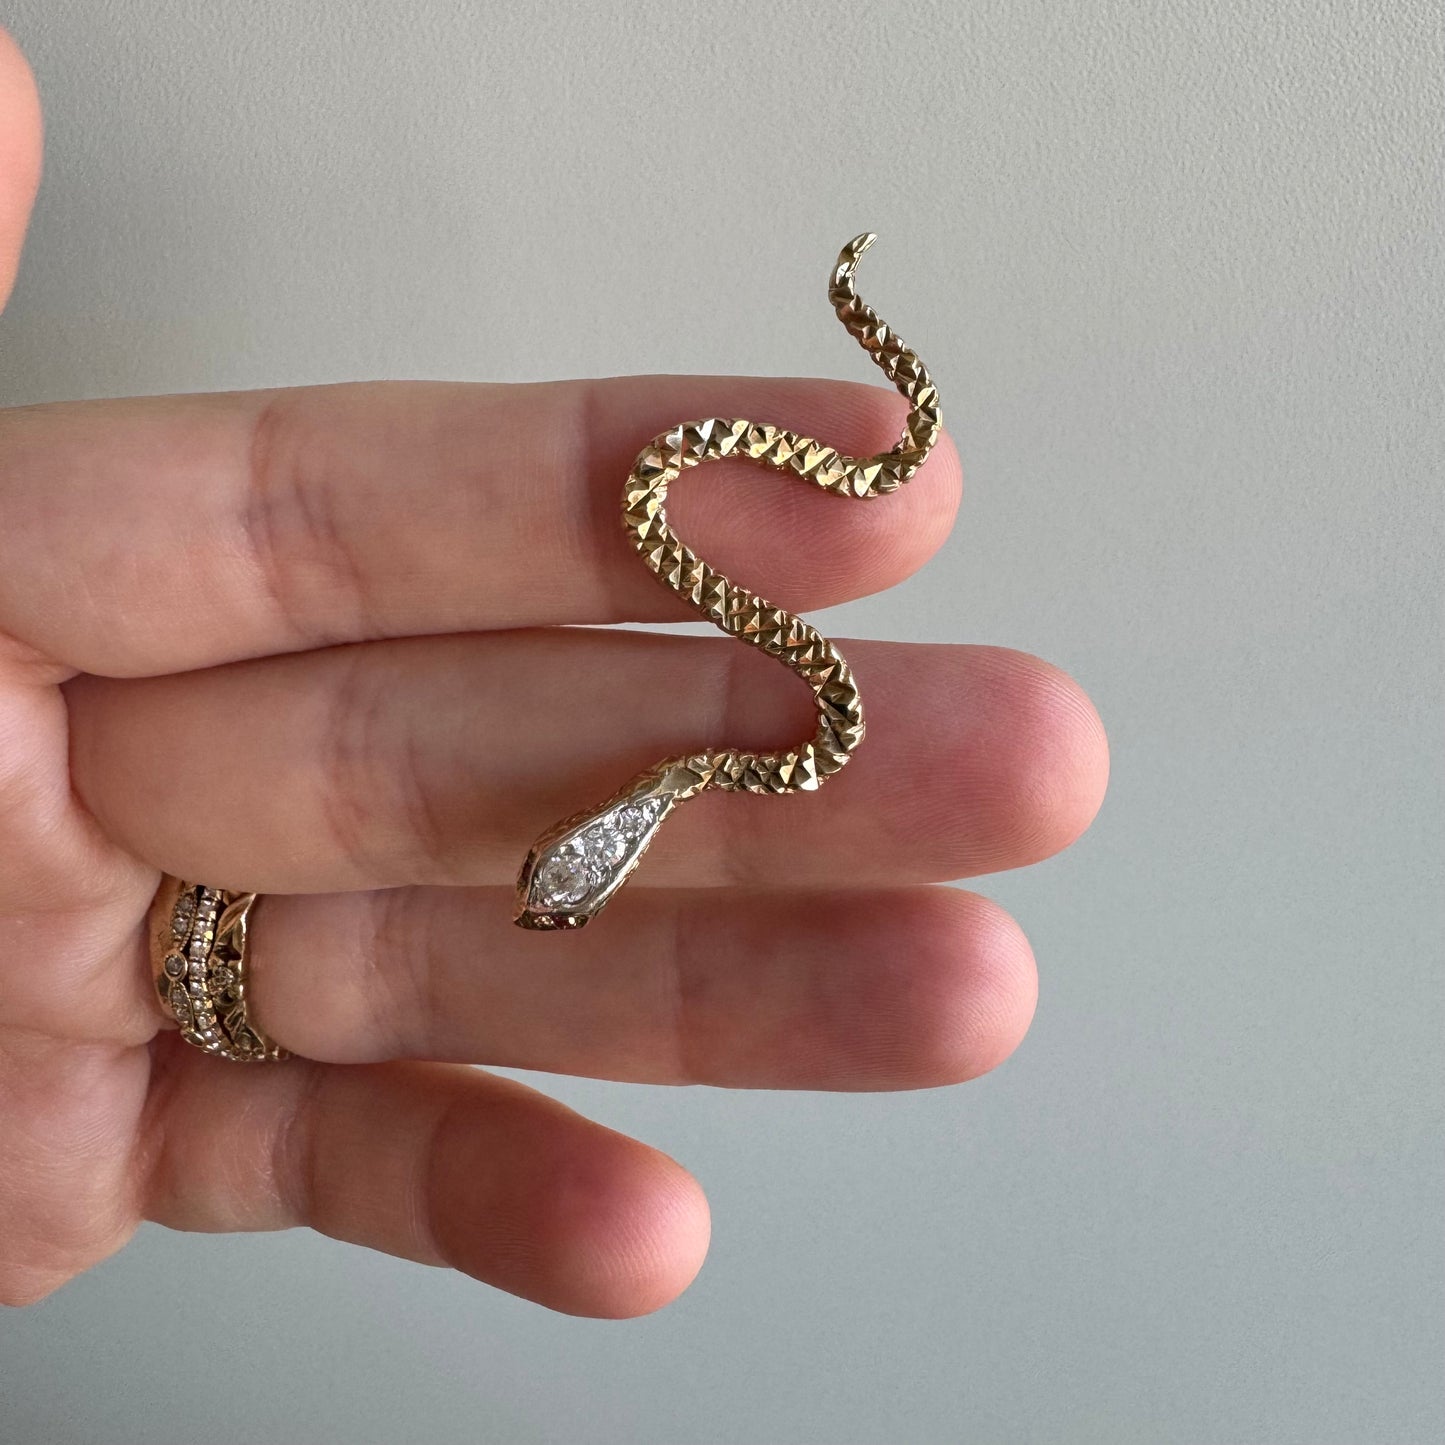 reimagined V I N T A G E // dynamic snake / 9k yellow gold and CZ / a conversion pendant